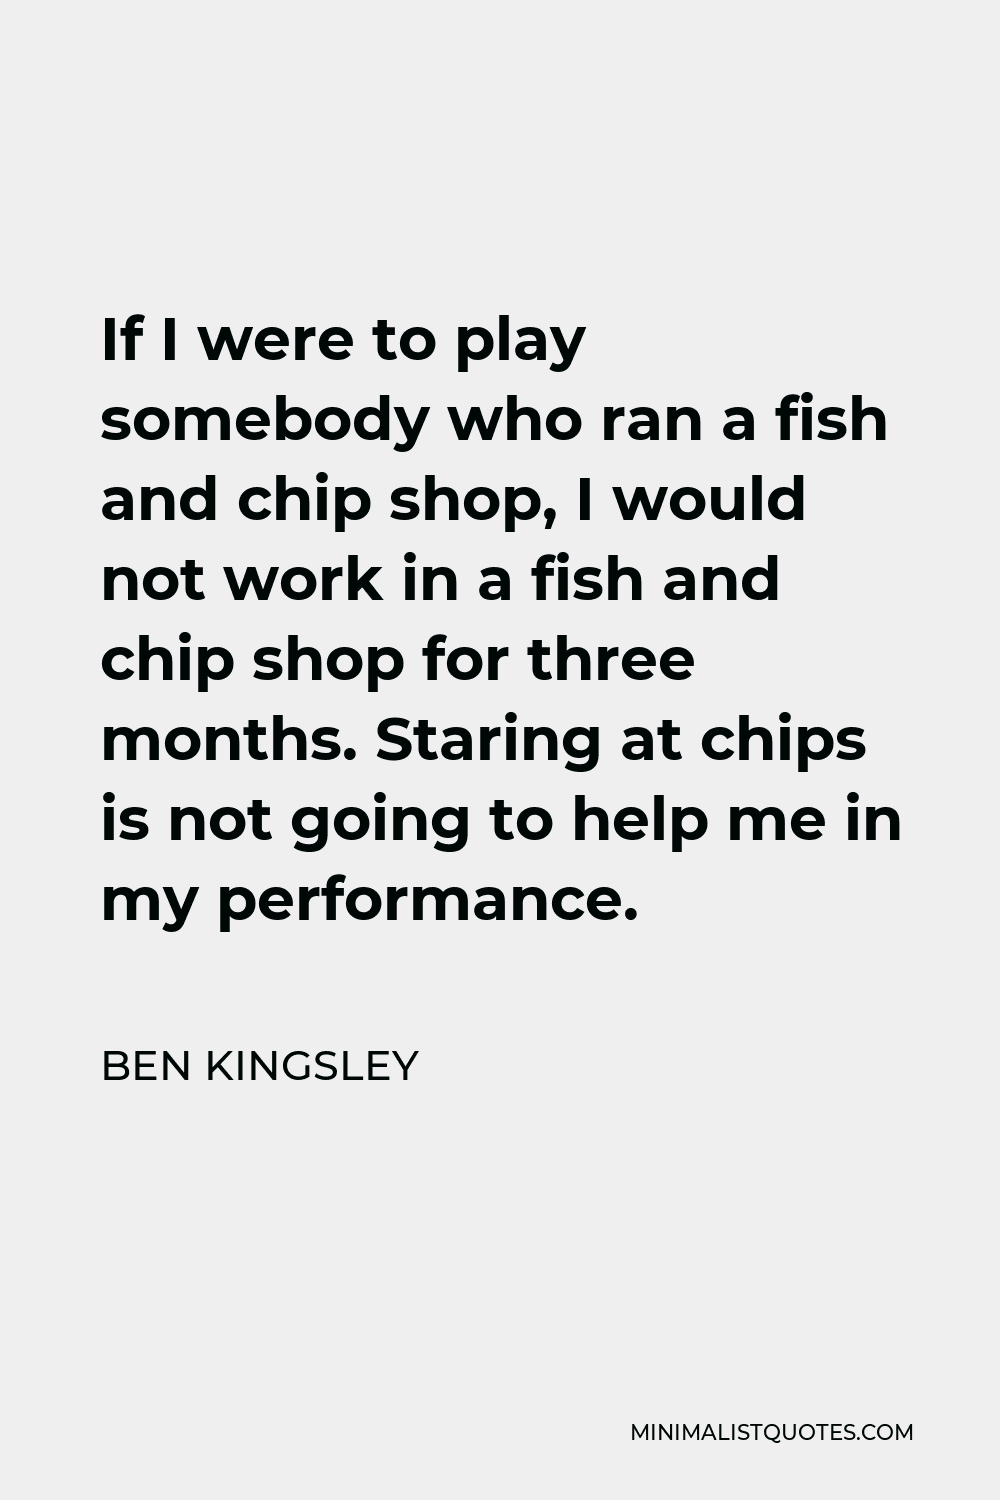 Ben Kingsley Quote - If I were to play somebody who ran a fish and chip shop, I would not work in a fish and chip shop for three months. Staring at chips is not going to help me in my performance.